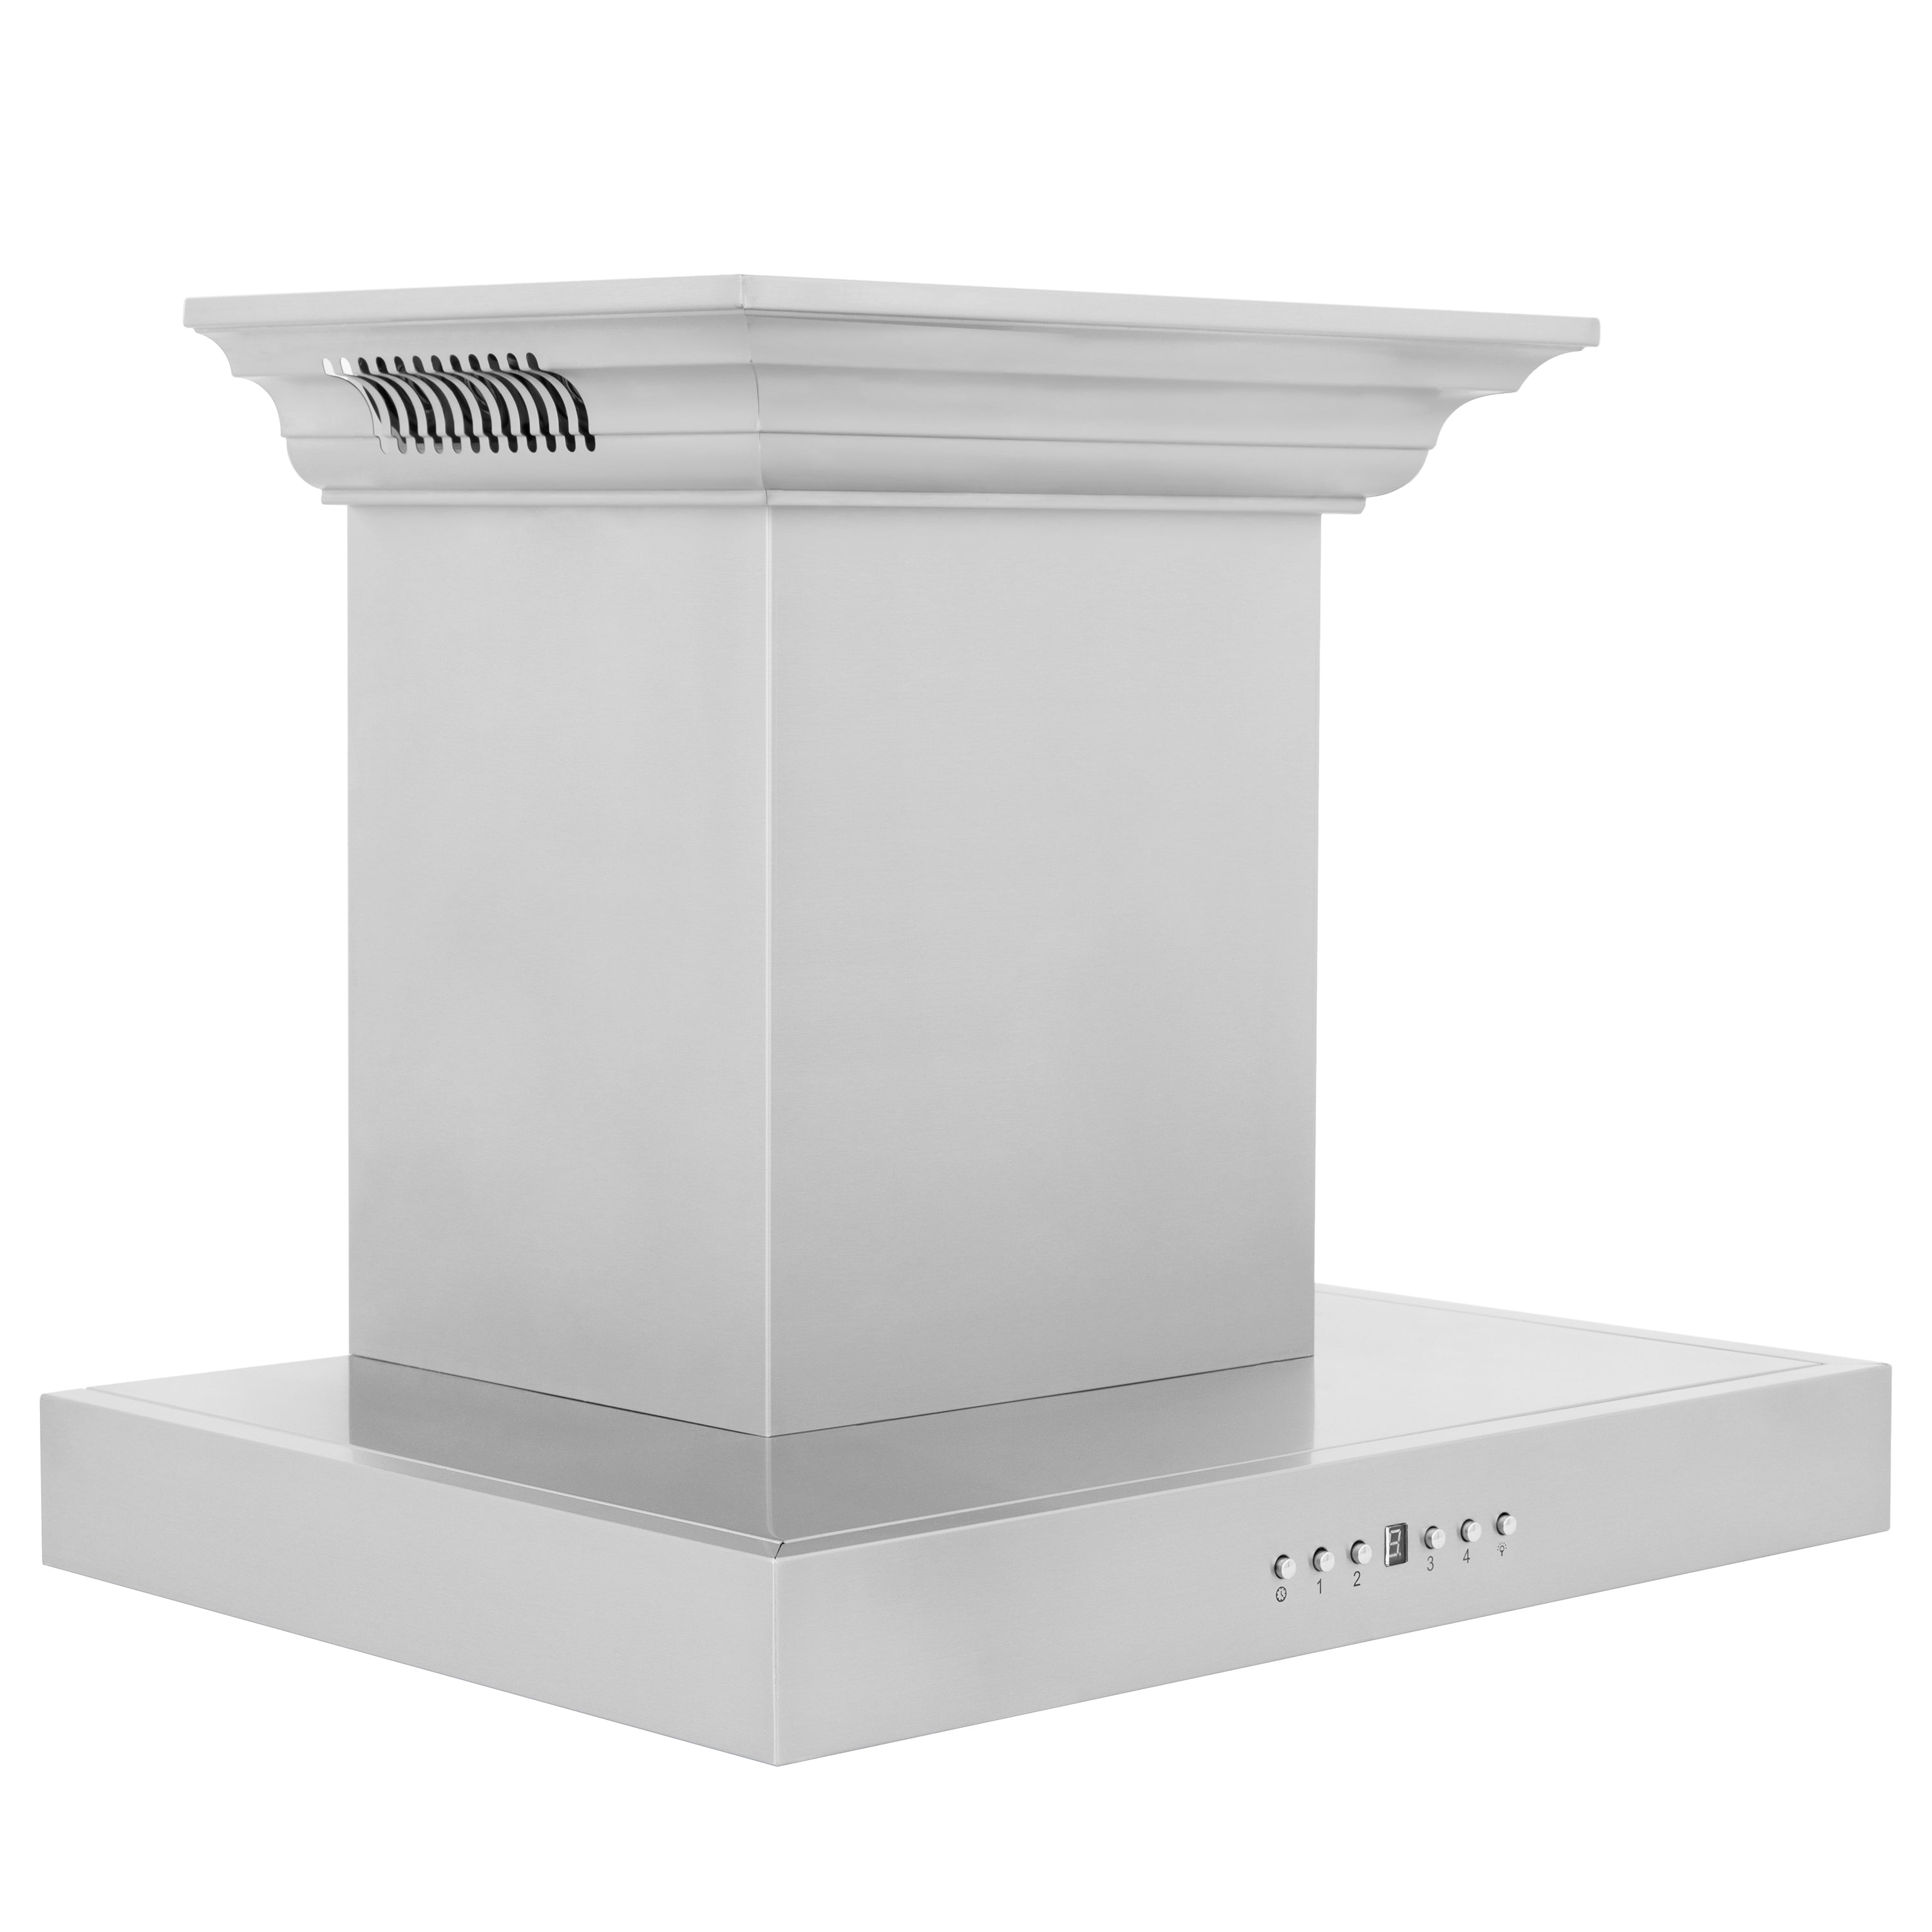 24" ZLINE CrownSound√∞ Ducted Vent Wall Mount Range Hood in Stainless Steel with Built-in Bluetooth Speakers (KECRN-BT-24)